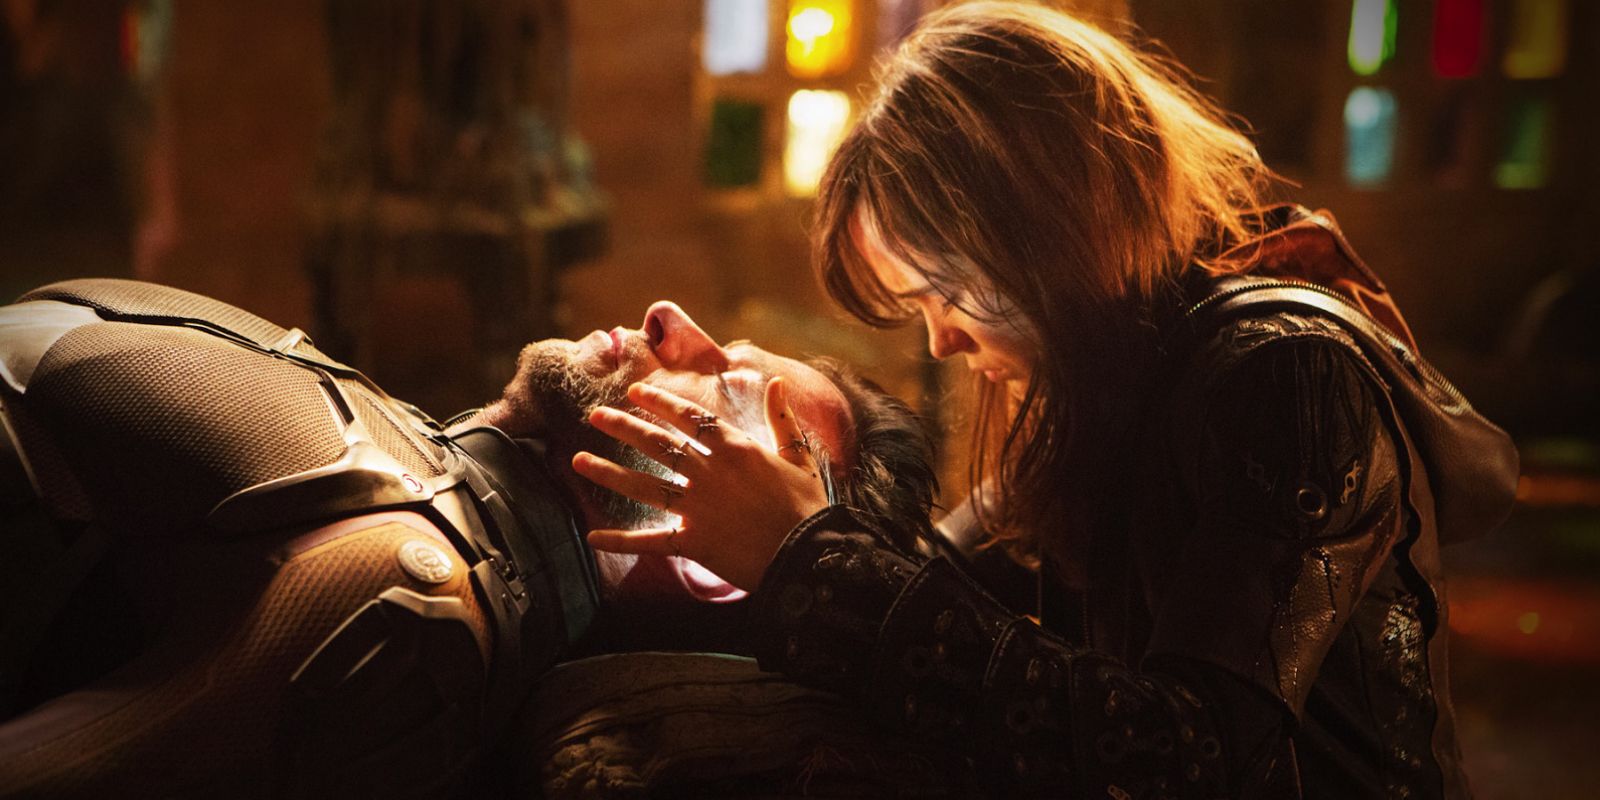 Elliot Page as Kitty Pryde transferring Wolverine's consciousness in X-Men: Days of Future Past